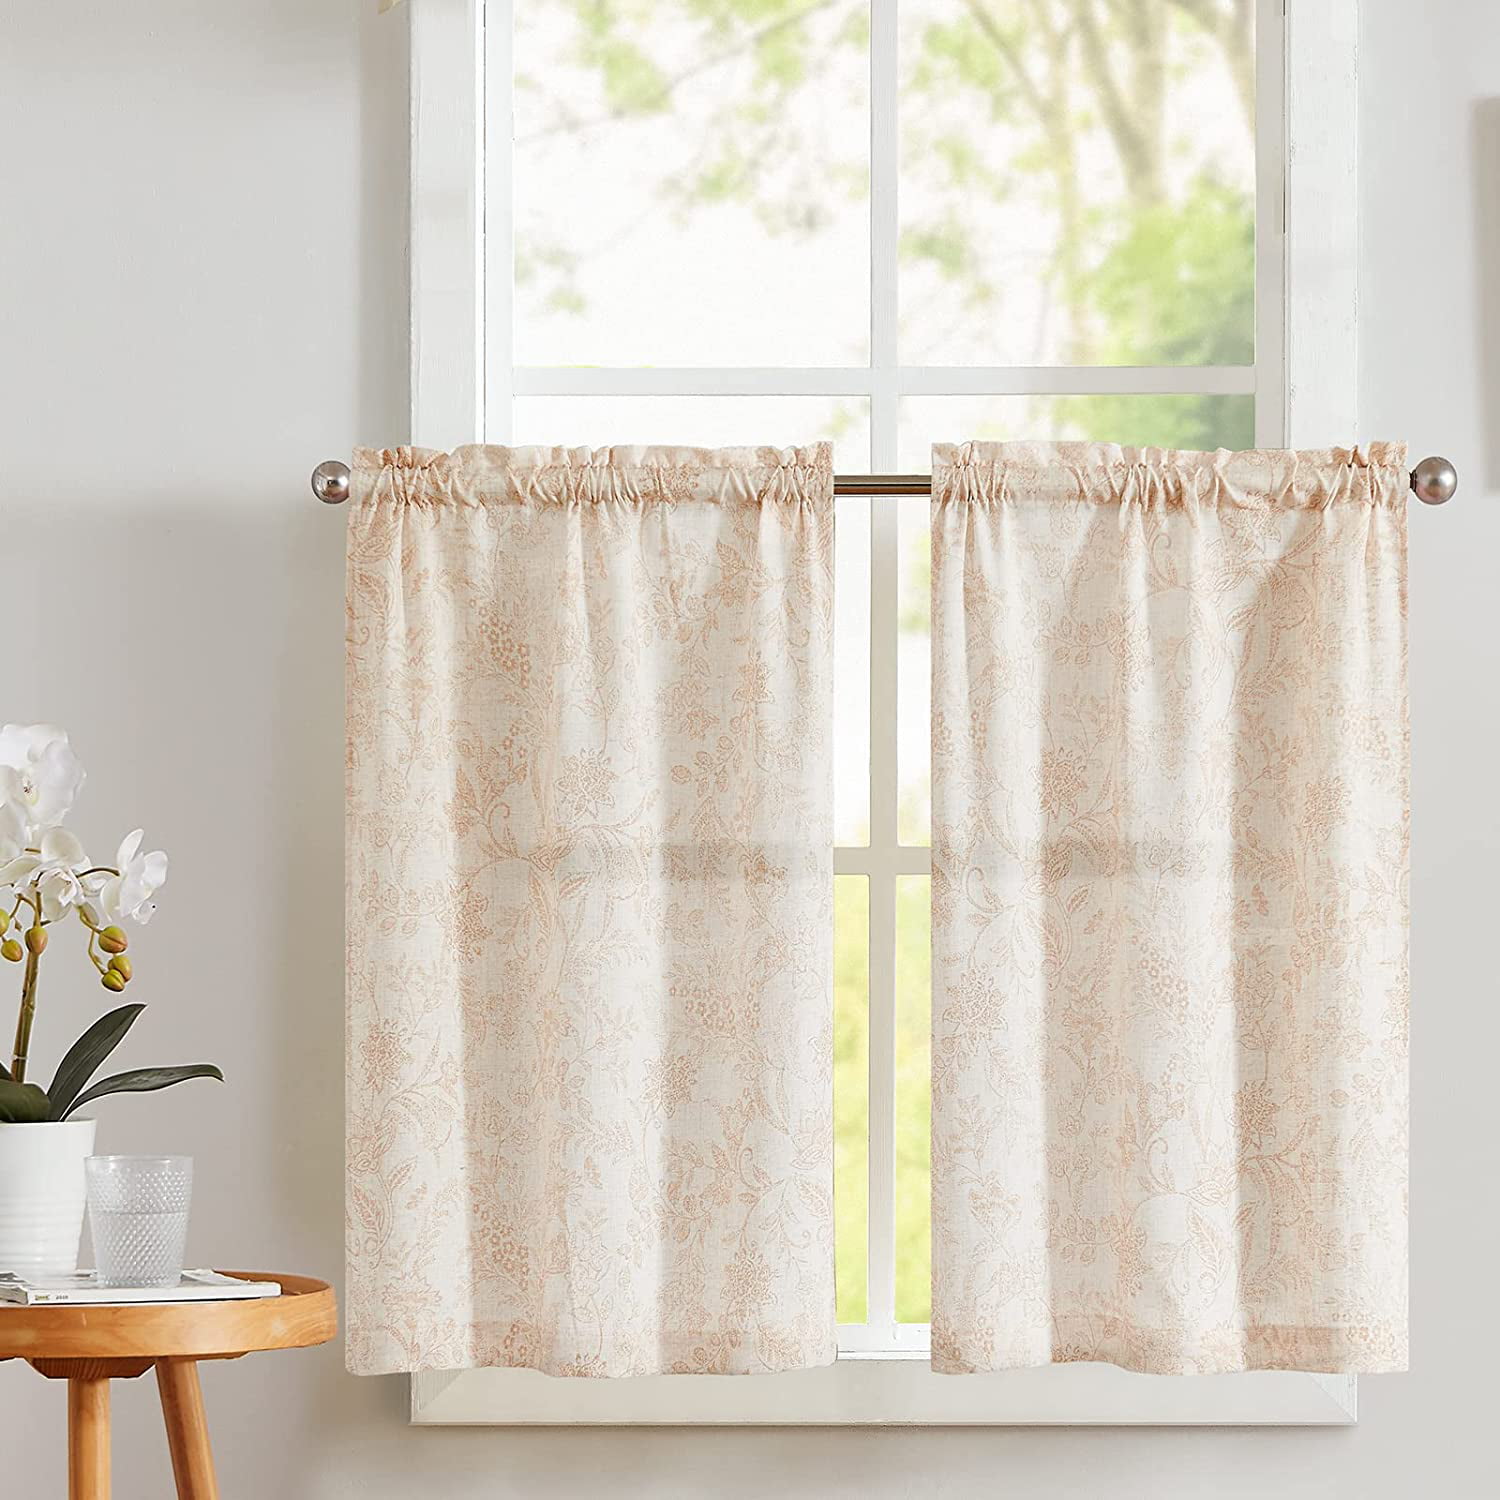 Vangao Linen Kitchen Curtains Cafe Tiers 36 Inch Length Farmhouse ...